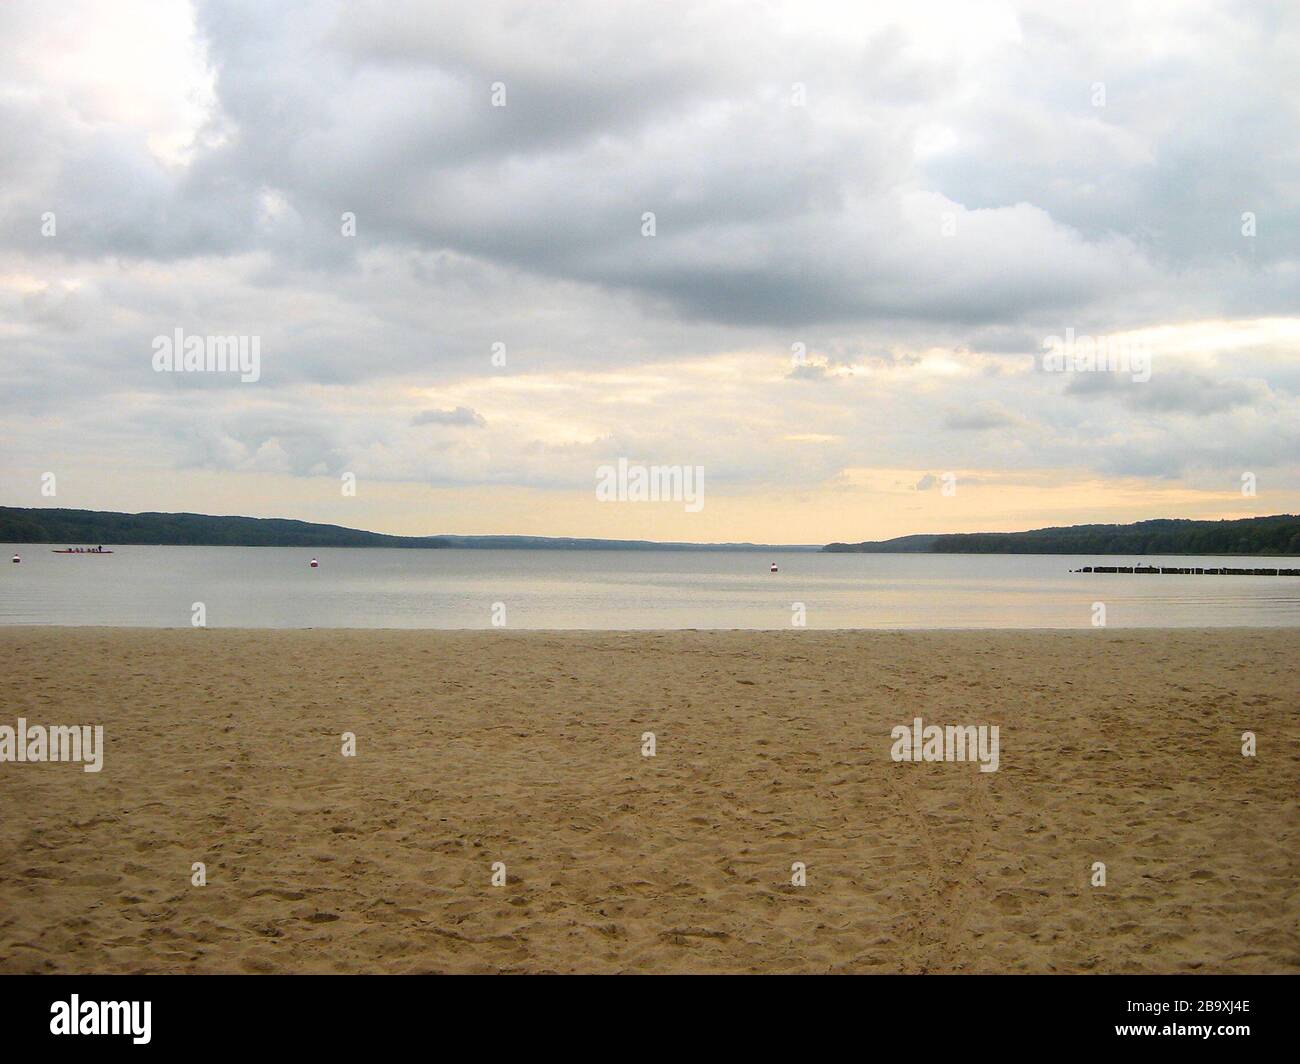 4 15 Am High Resolution Stock Photography and Images - Alamy